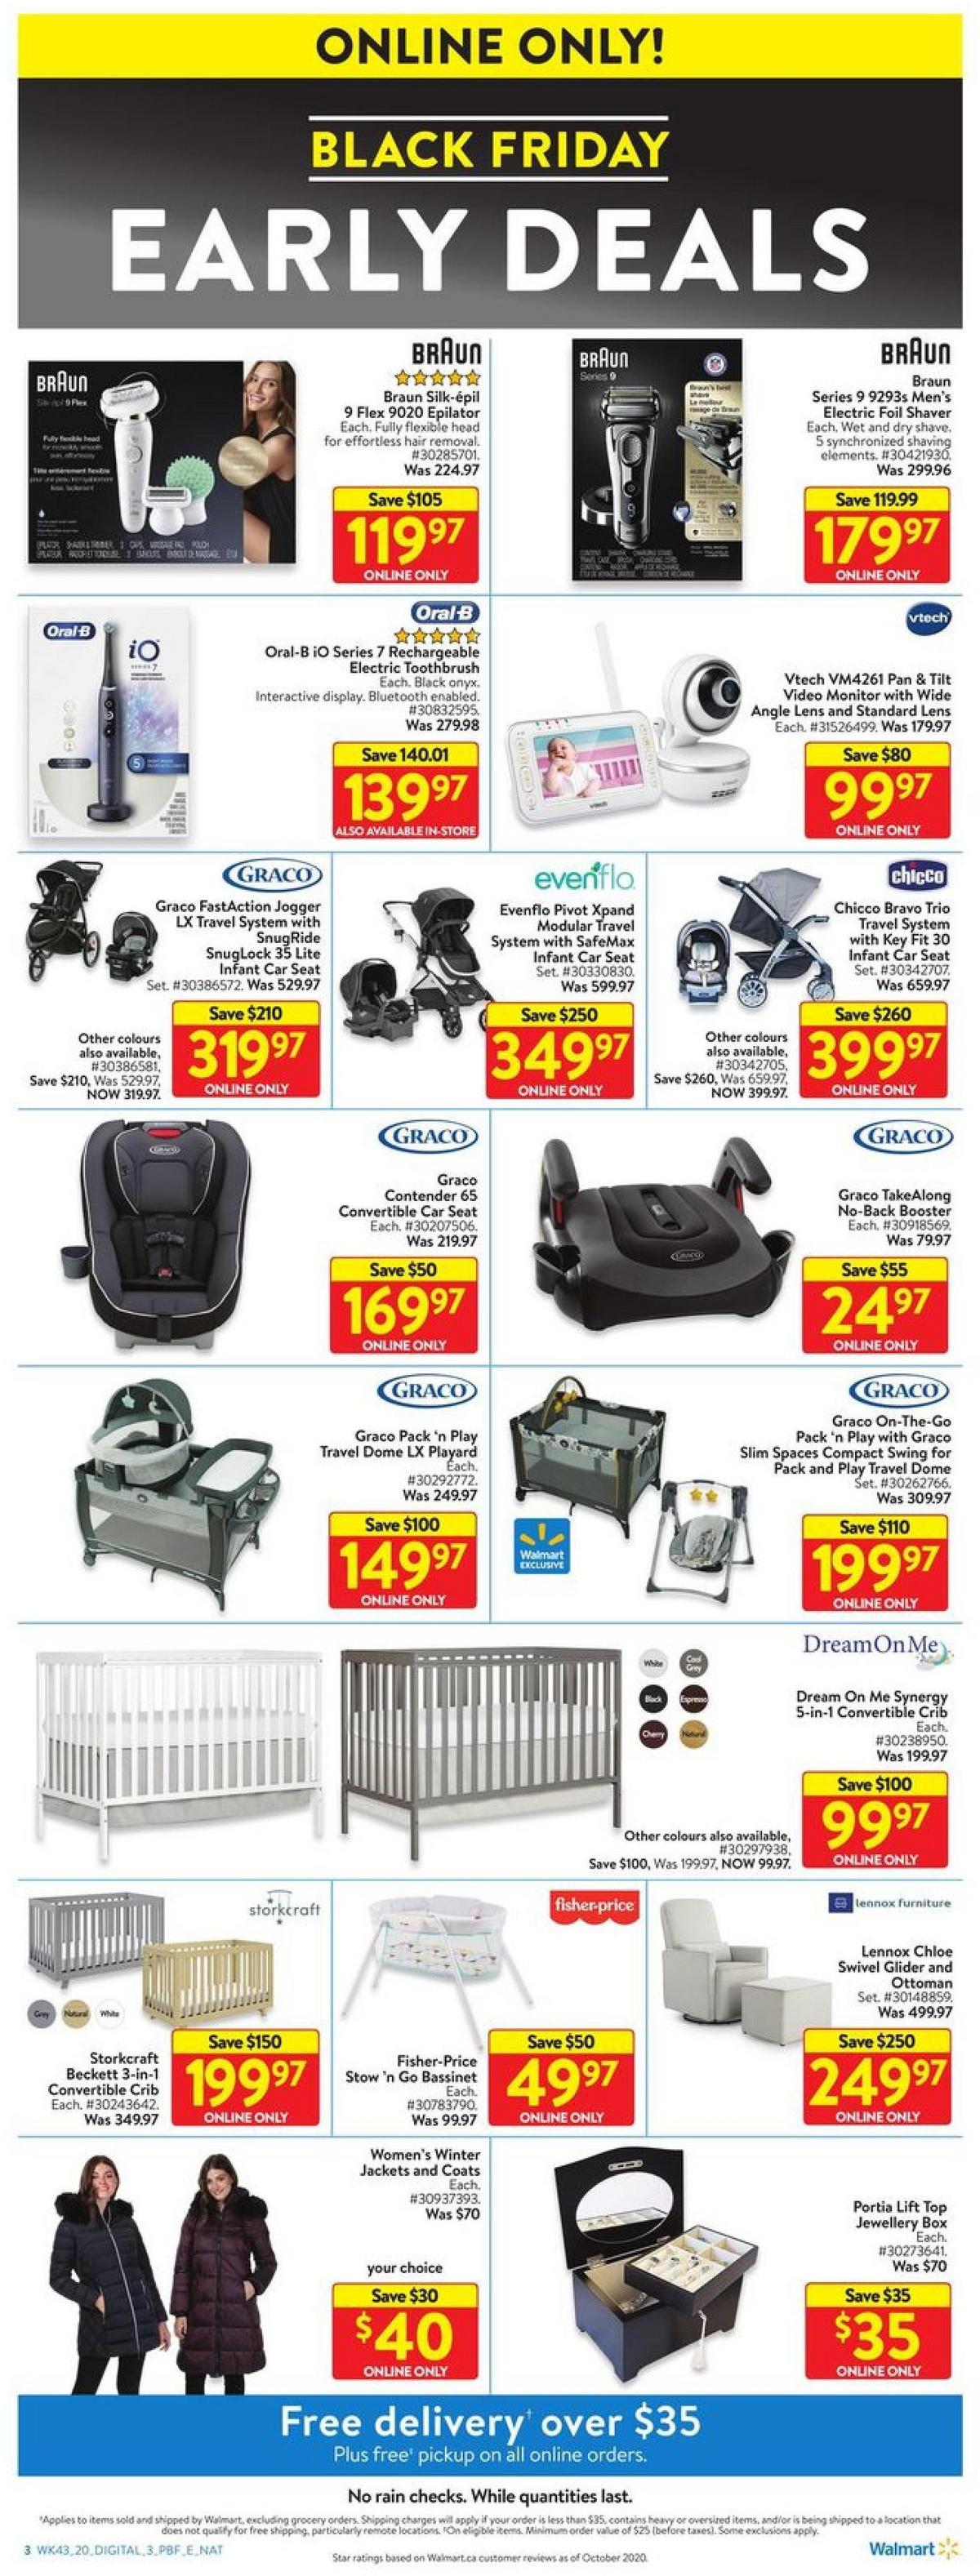 Walmart Black Friday Early Deals Flyer from November 19